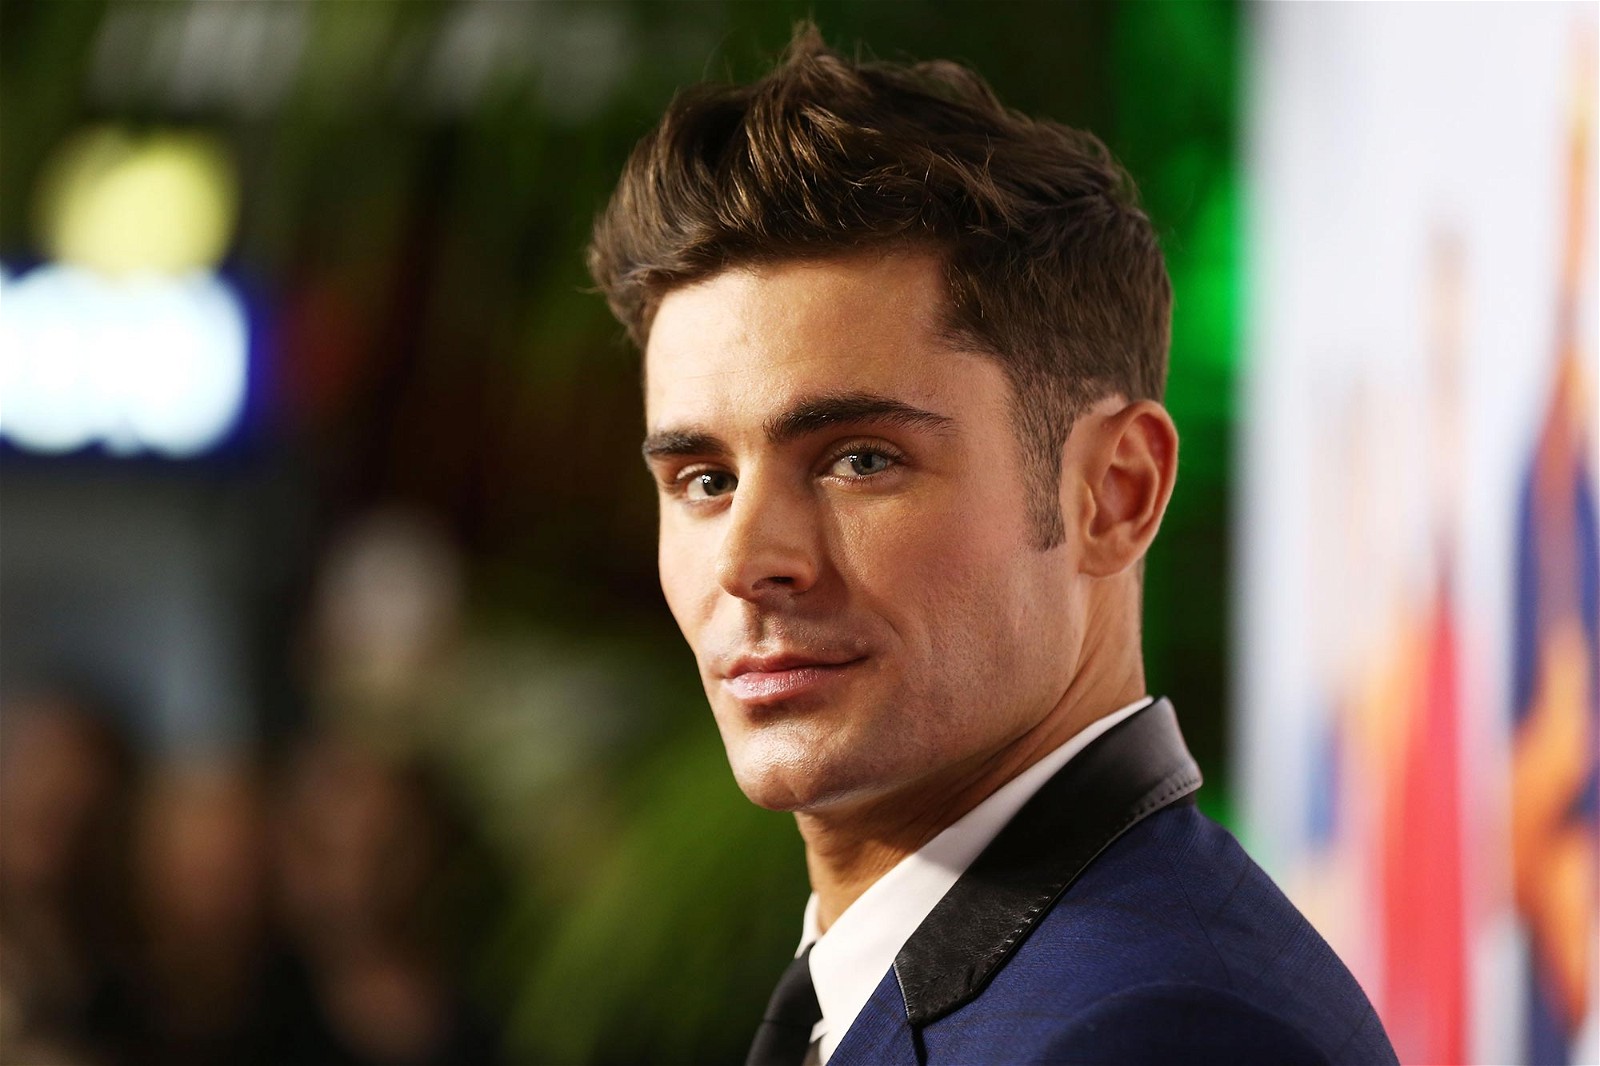 Zac Efron posing for the cameras at an event.